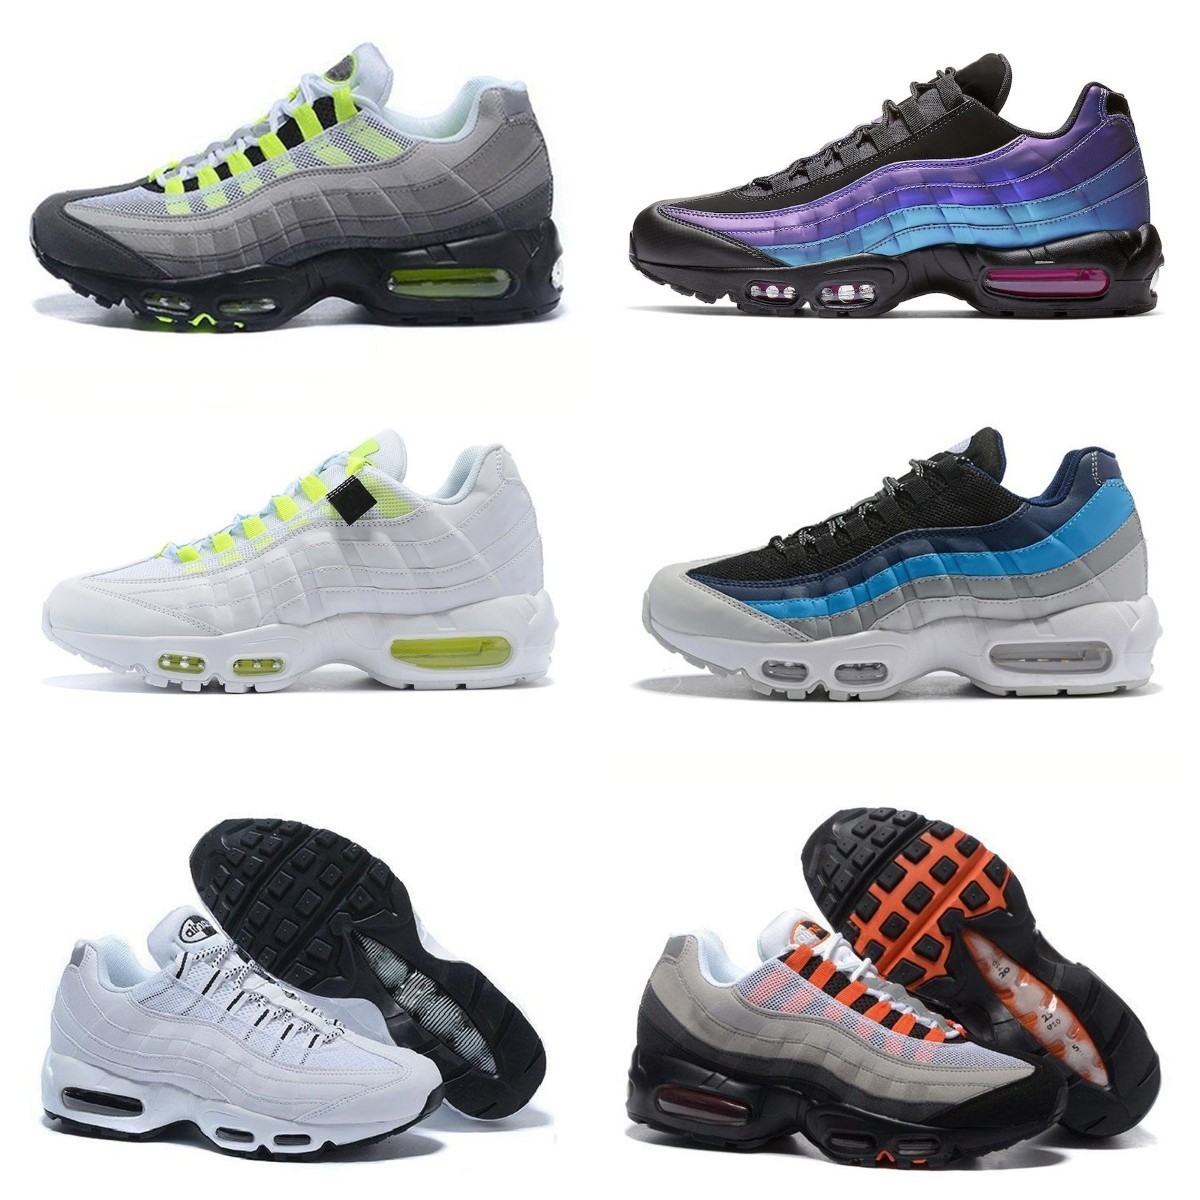 

High Quality Mens 95 Running Shoes Classic Yin Yang OG Airs Solar Triple Black White 95s Worldwide Seahawks Grey Neon Red Greedy 3.0 Laser Fuchsia Sports Sneakers Y88, Please contact us